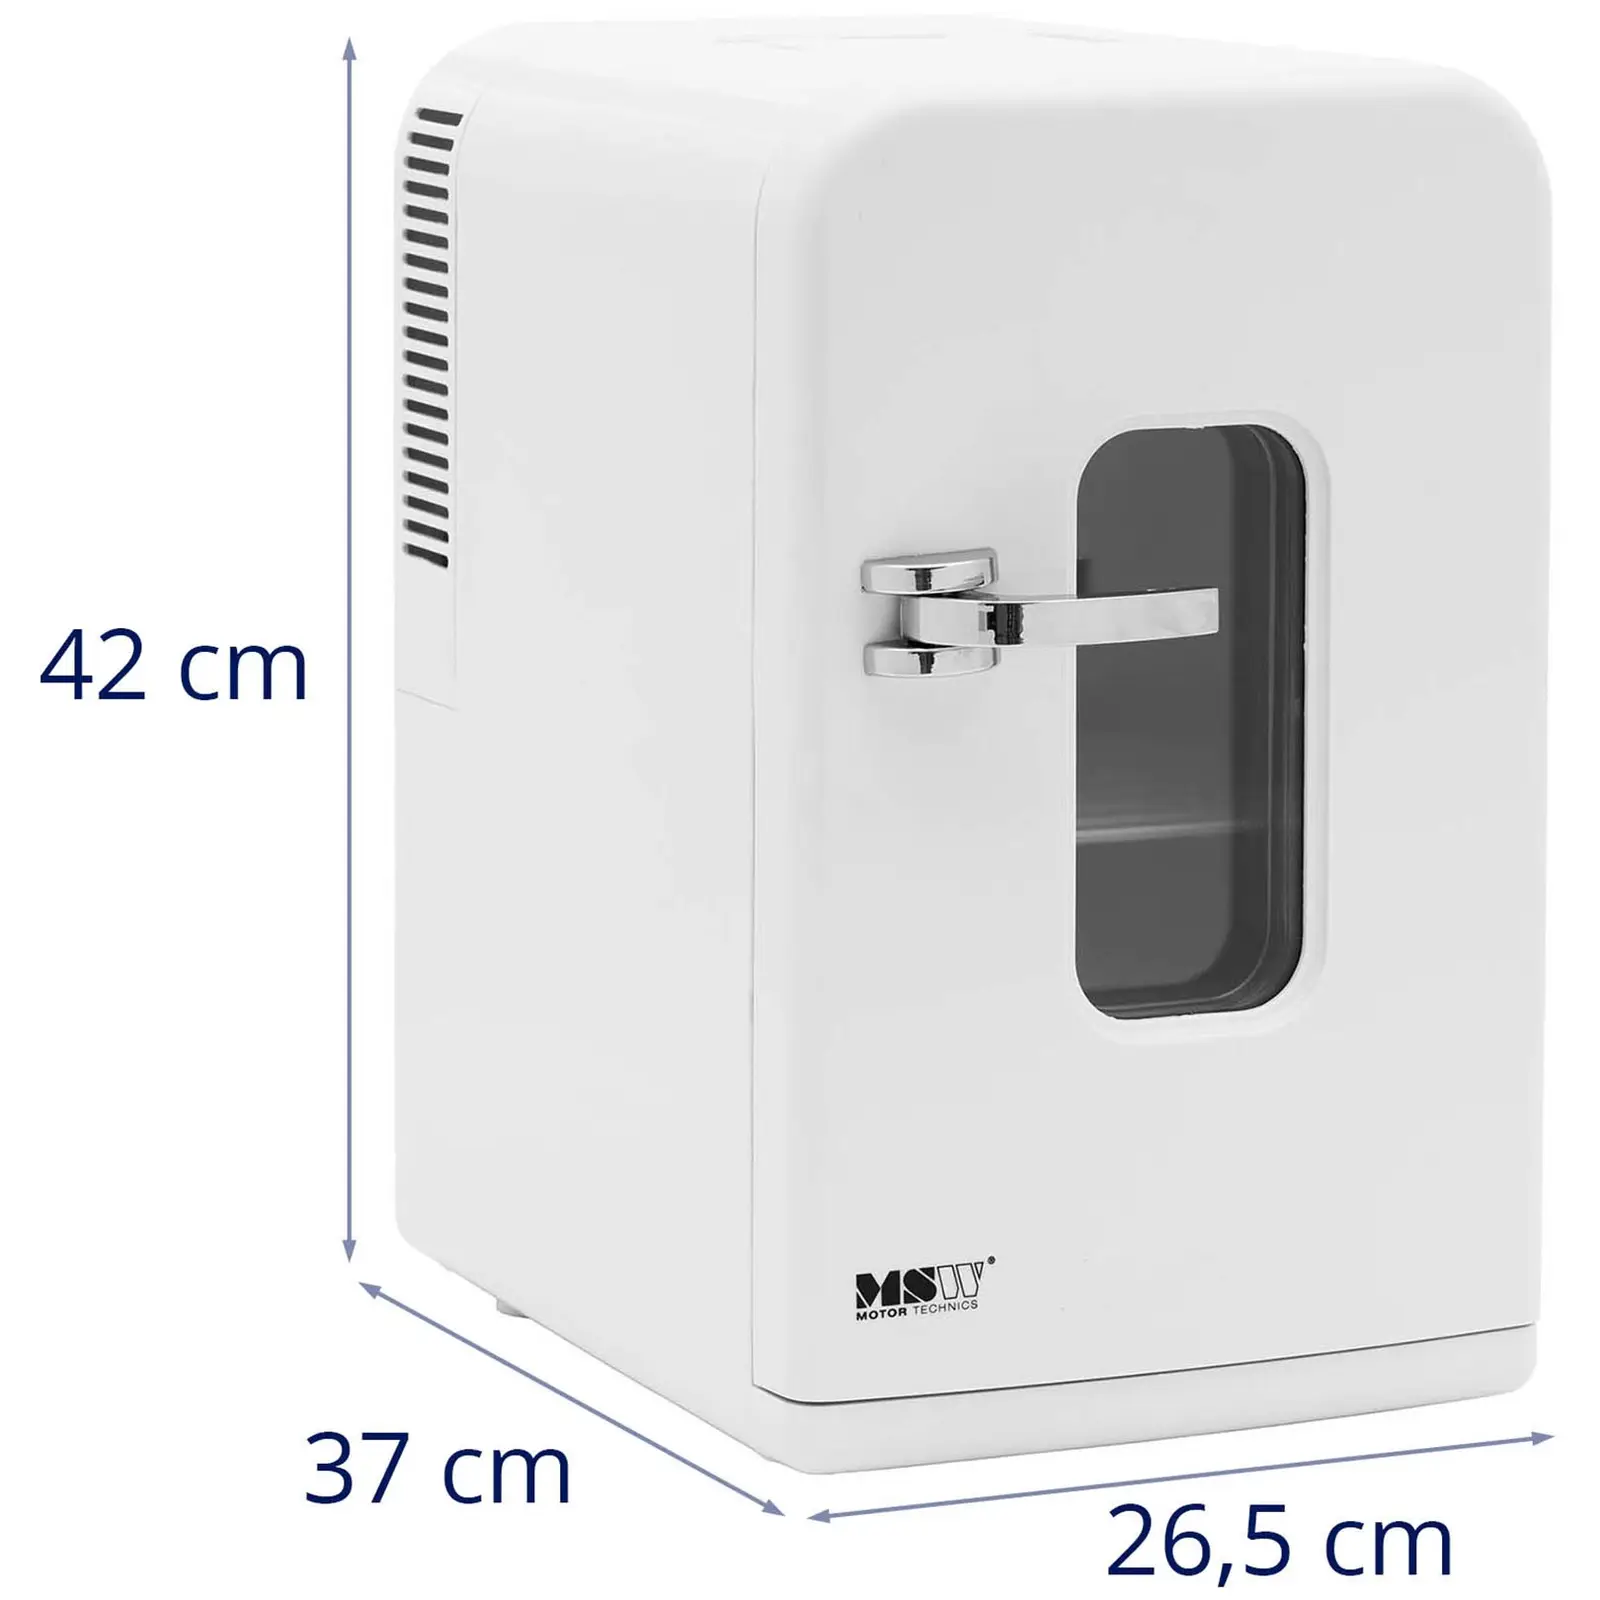 Mini Refrigerator 12 V / 230 V - 2-in-1 appliance with keep-warm function - 15 L - White